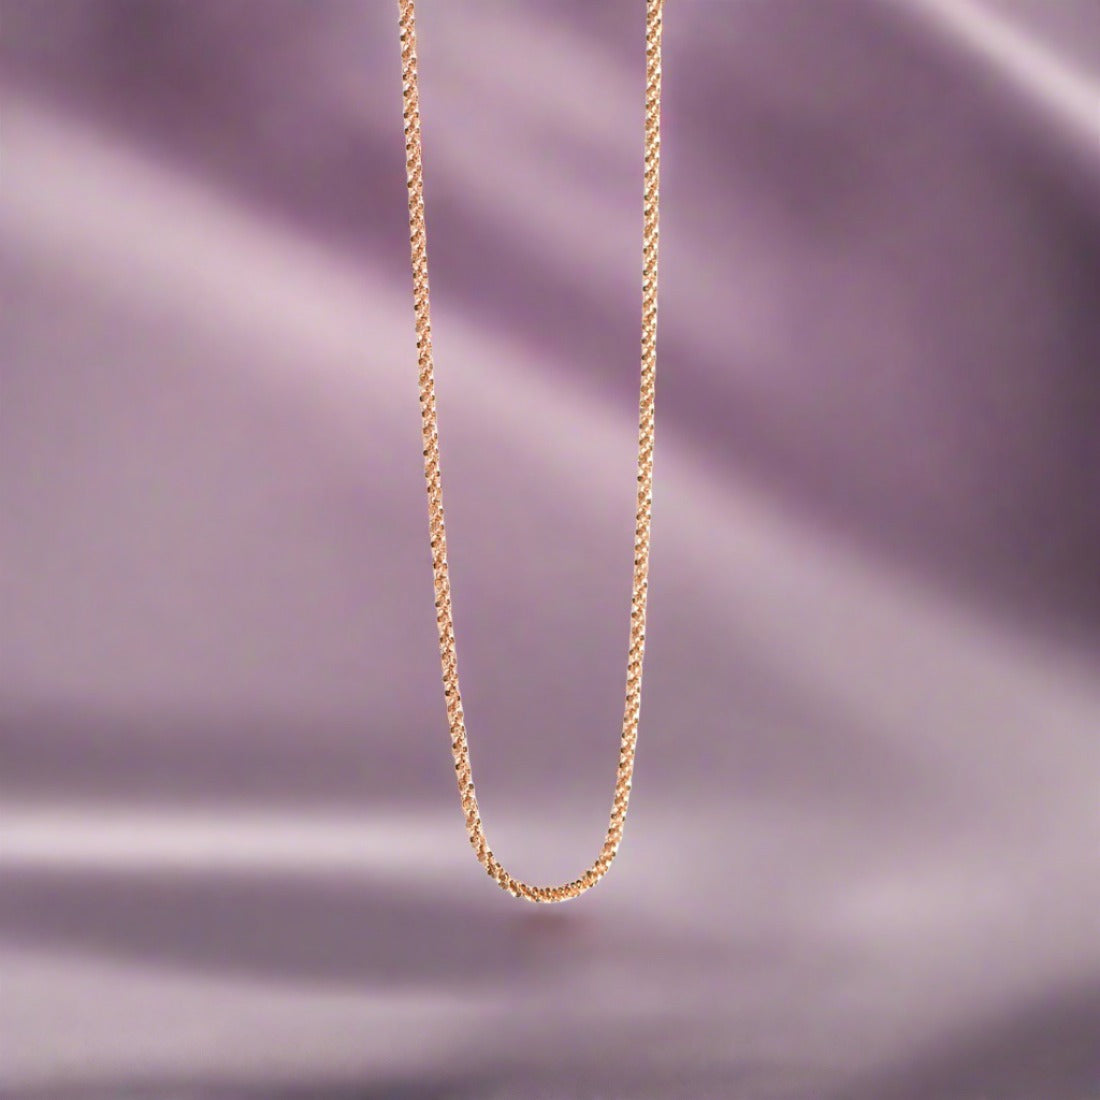 Adorable Rose Gold Plated 925 Sterling Silver Chain